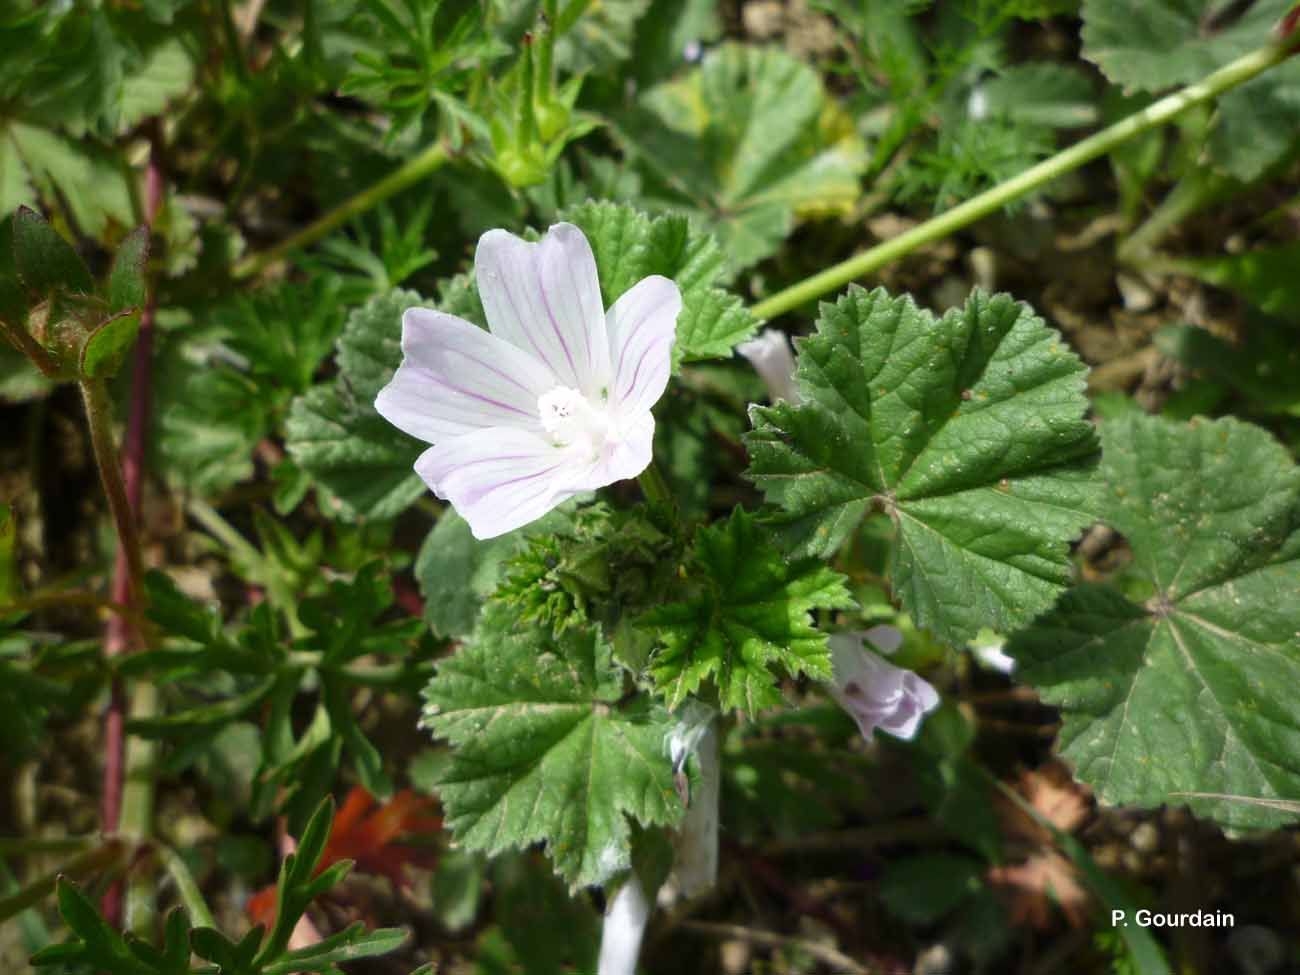 Image of low mallow